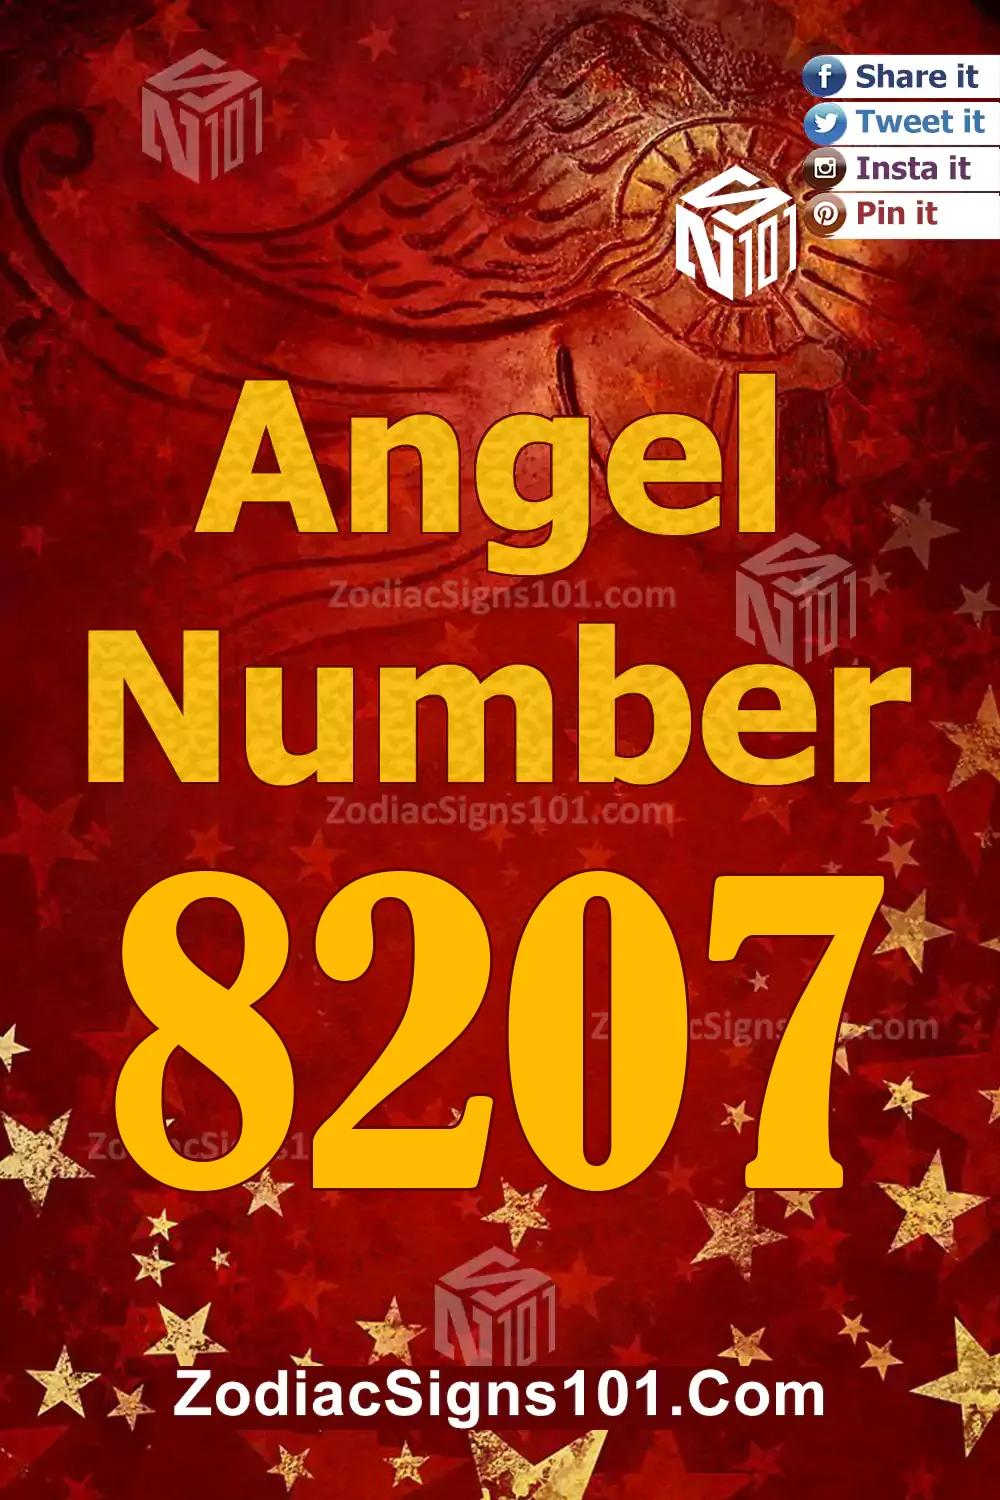 8207 Angel Number Meaning